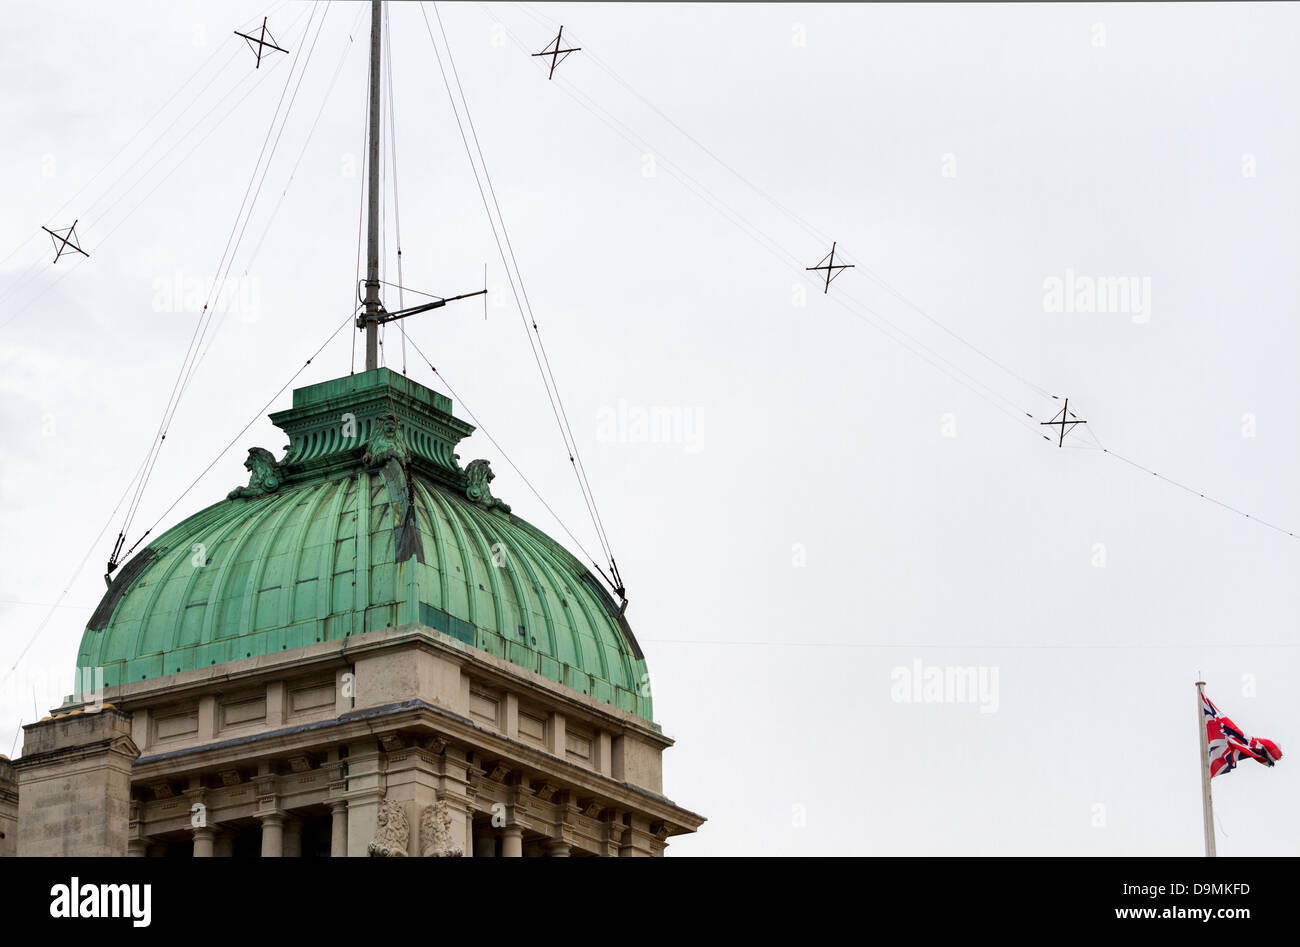 Military communication HF aerials on roof of the Old Admiralty Buildings, overlooking Horse Guards Parade, Whitehall, London UK Stock Photo